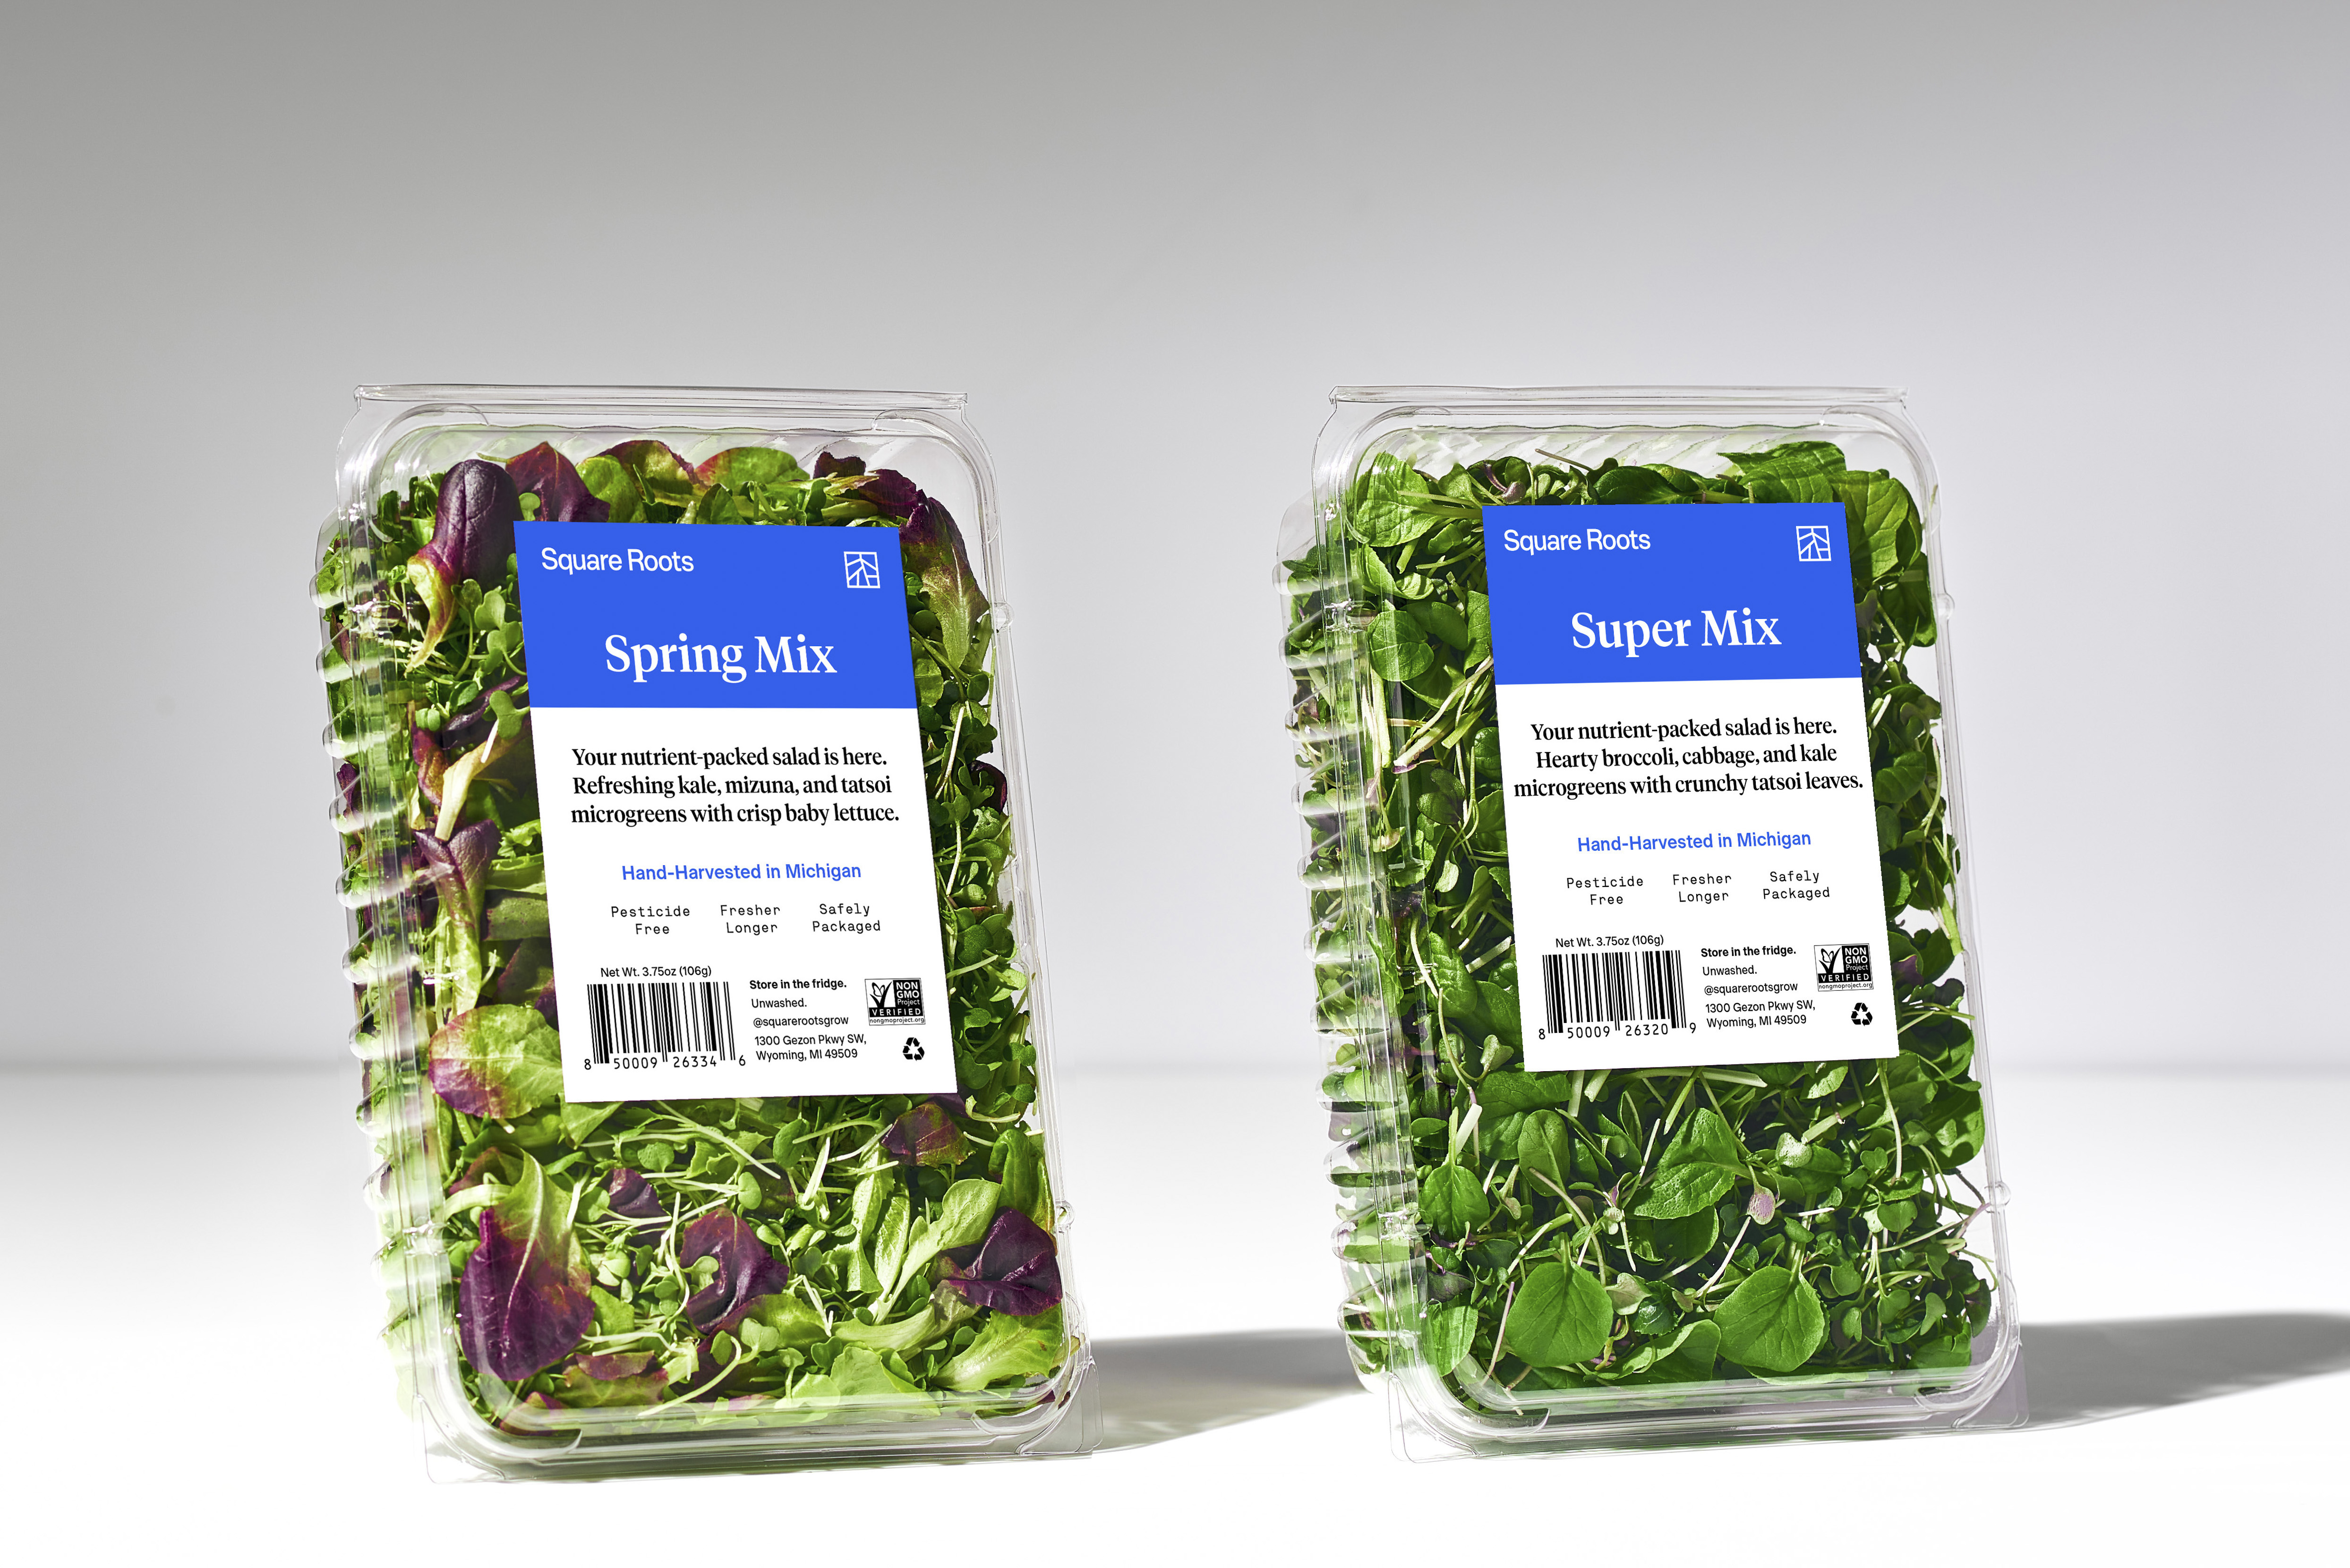 Square Roots, the technology leader in urban indoor farming, is expanding its retail presence with two new salad mixes, entering the $8.1 billion packaged salads and greens category.